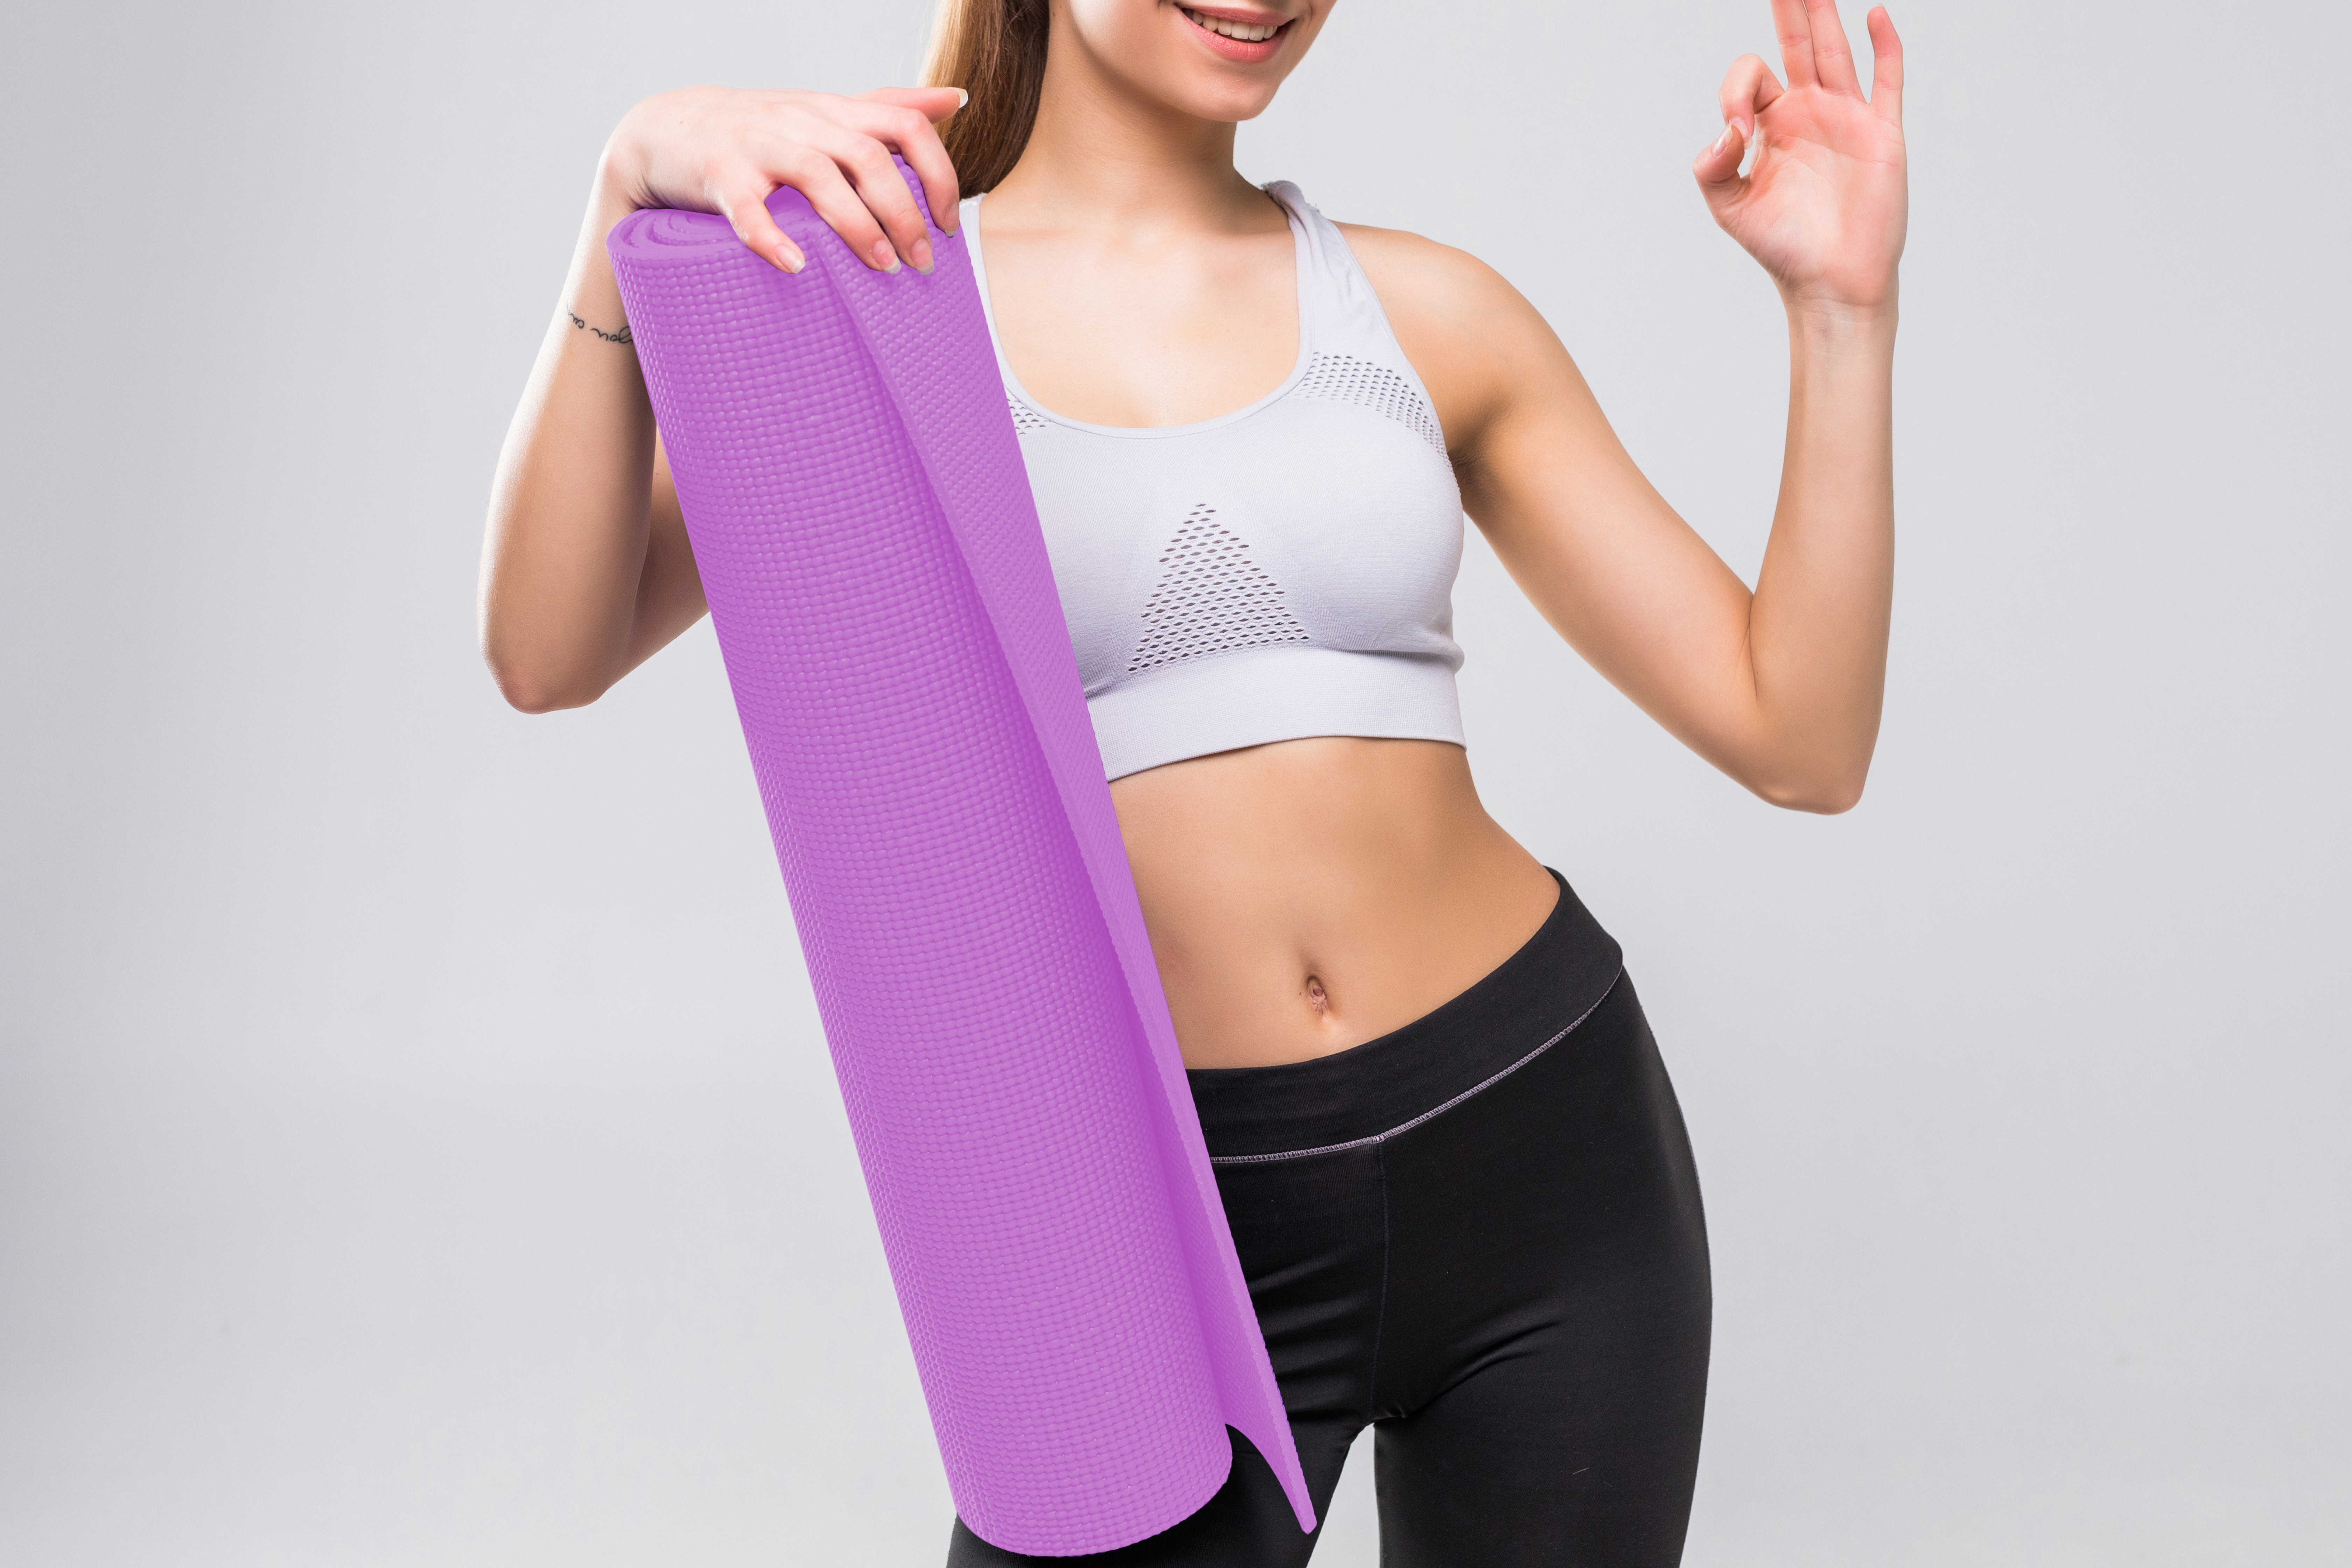 Steelbird Yoga Mat 6mm For Men And Women 6 X 2 Feet Wide Extra Thick Exercise Mat For Workout,Yoga,Fitness,Gym, Pilates And High-Density Anti-Tear Non-Slip Light Weight Mat (Light Violet)